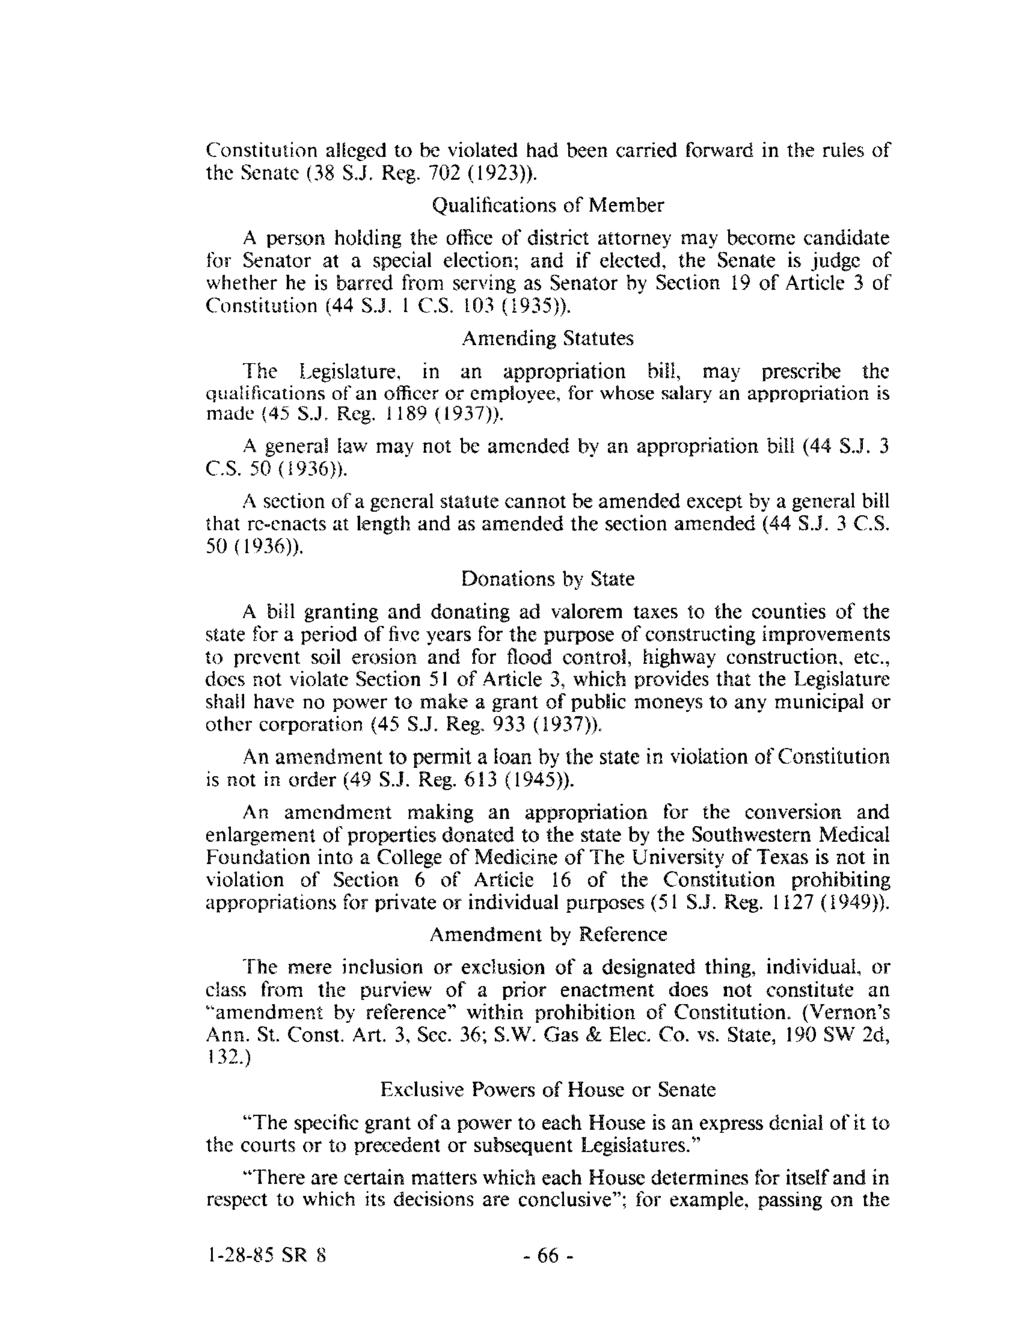 Case 2:13-cv-00193 Document 664-22 Filed in TXSD on 11/11/14 Page 70 of 140 Constitution alleged to be violated had been carried forward in the rules of the Senate (38 SJ. Reg. 702 (1923)).